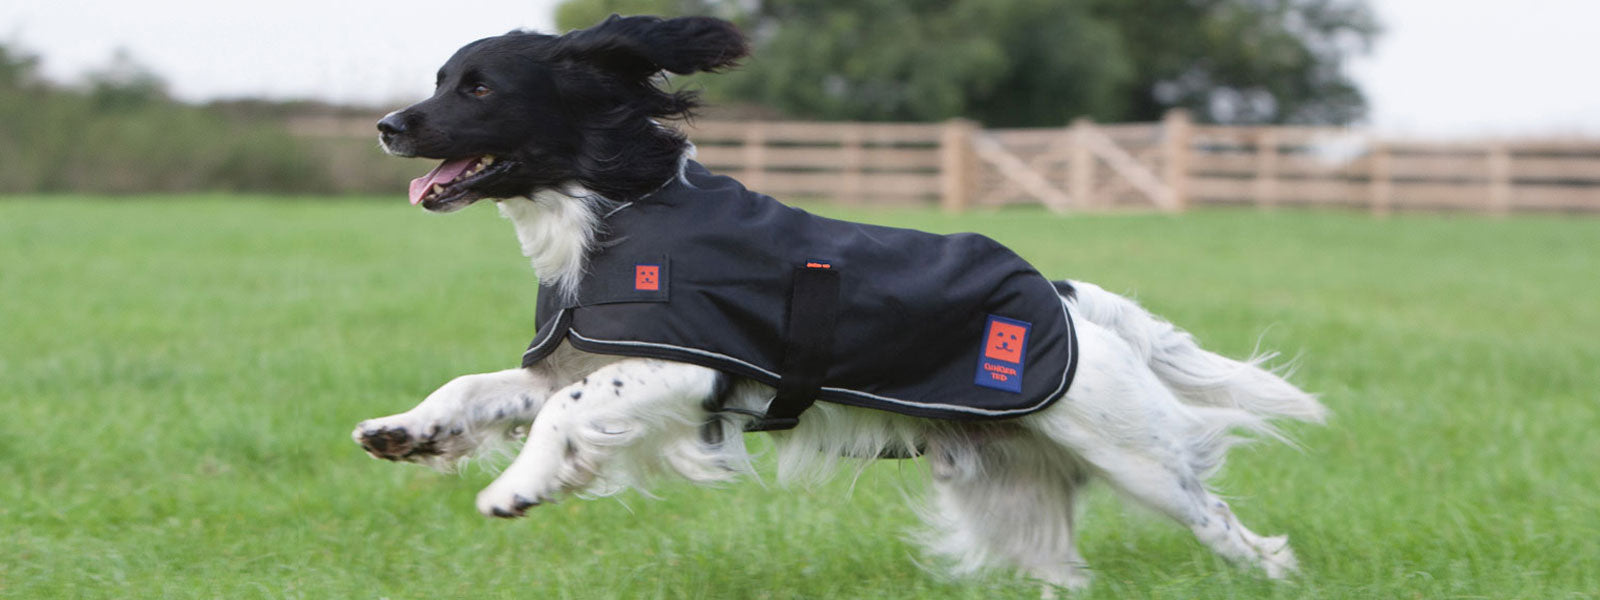 Ginger Ted lightweight waterproof dog coats & clothing. Ideal for Spring/Summer or dogs with thick fur